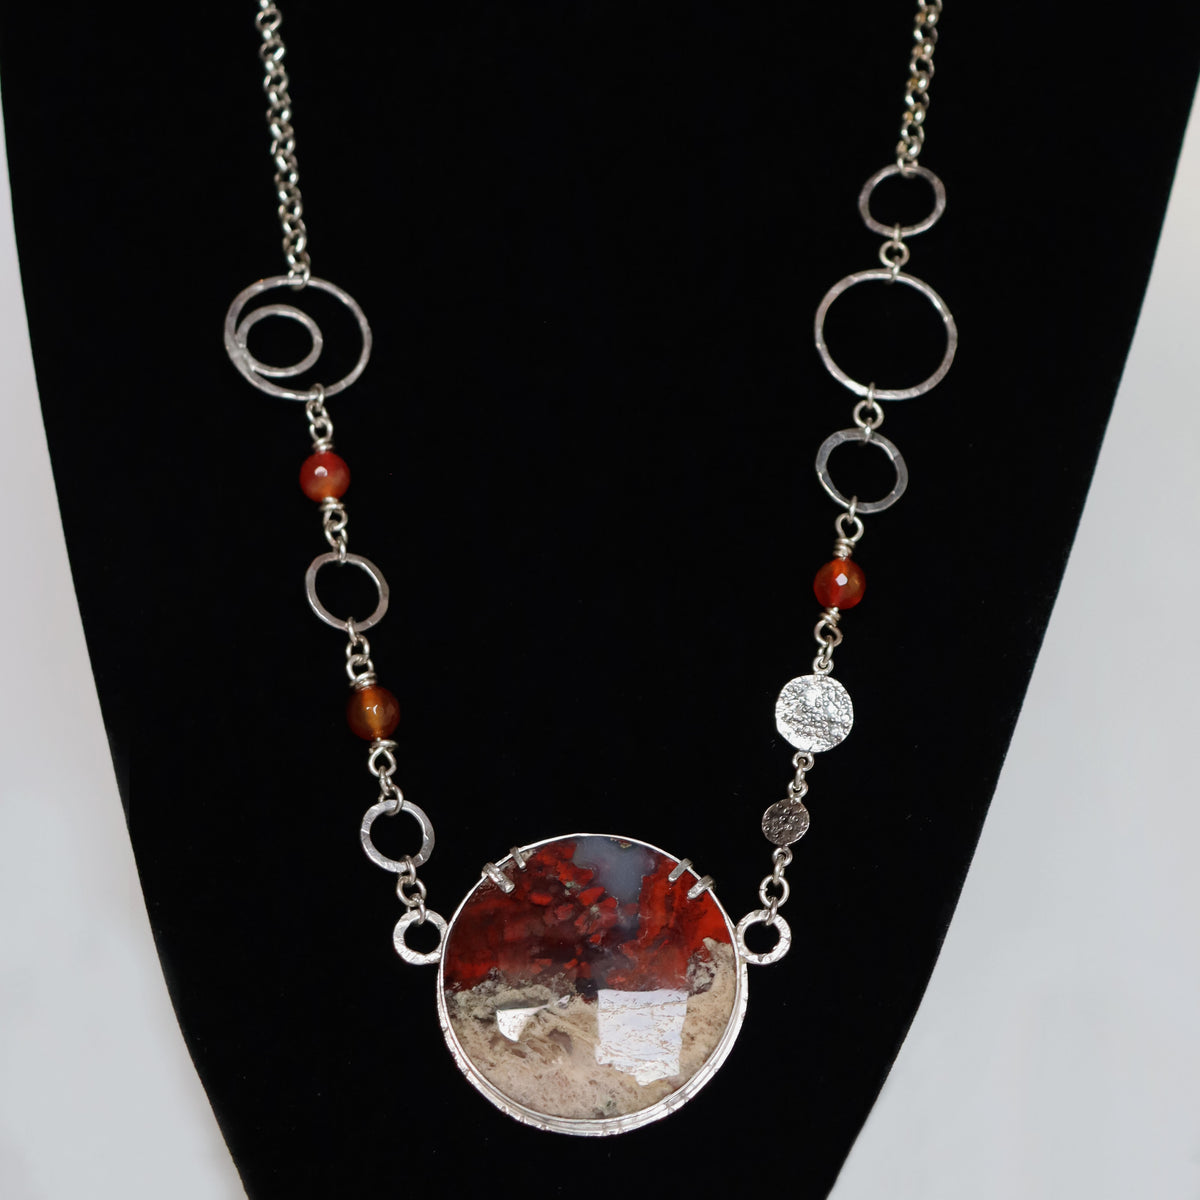 hand hammered round links silver necklace with spectacular dendritic agate, by roffjewellery.com